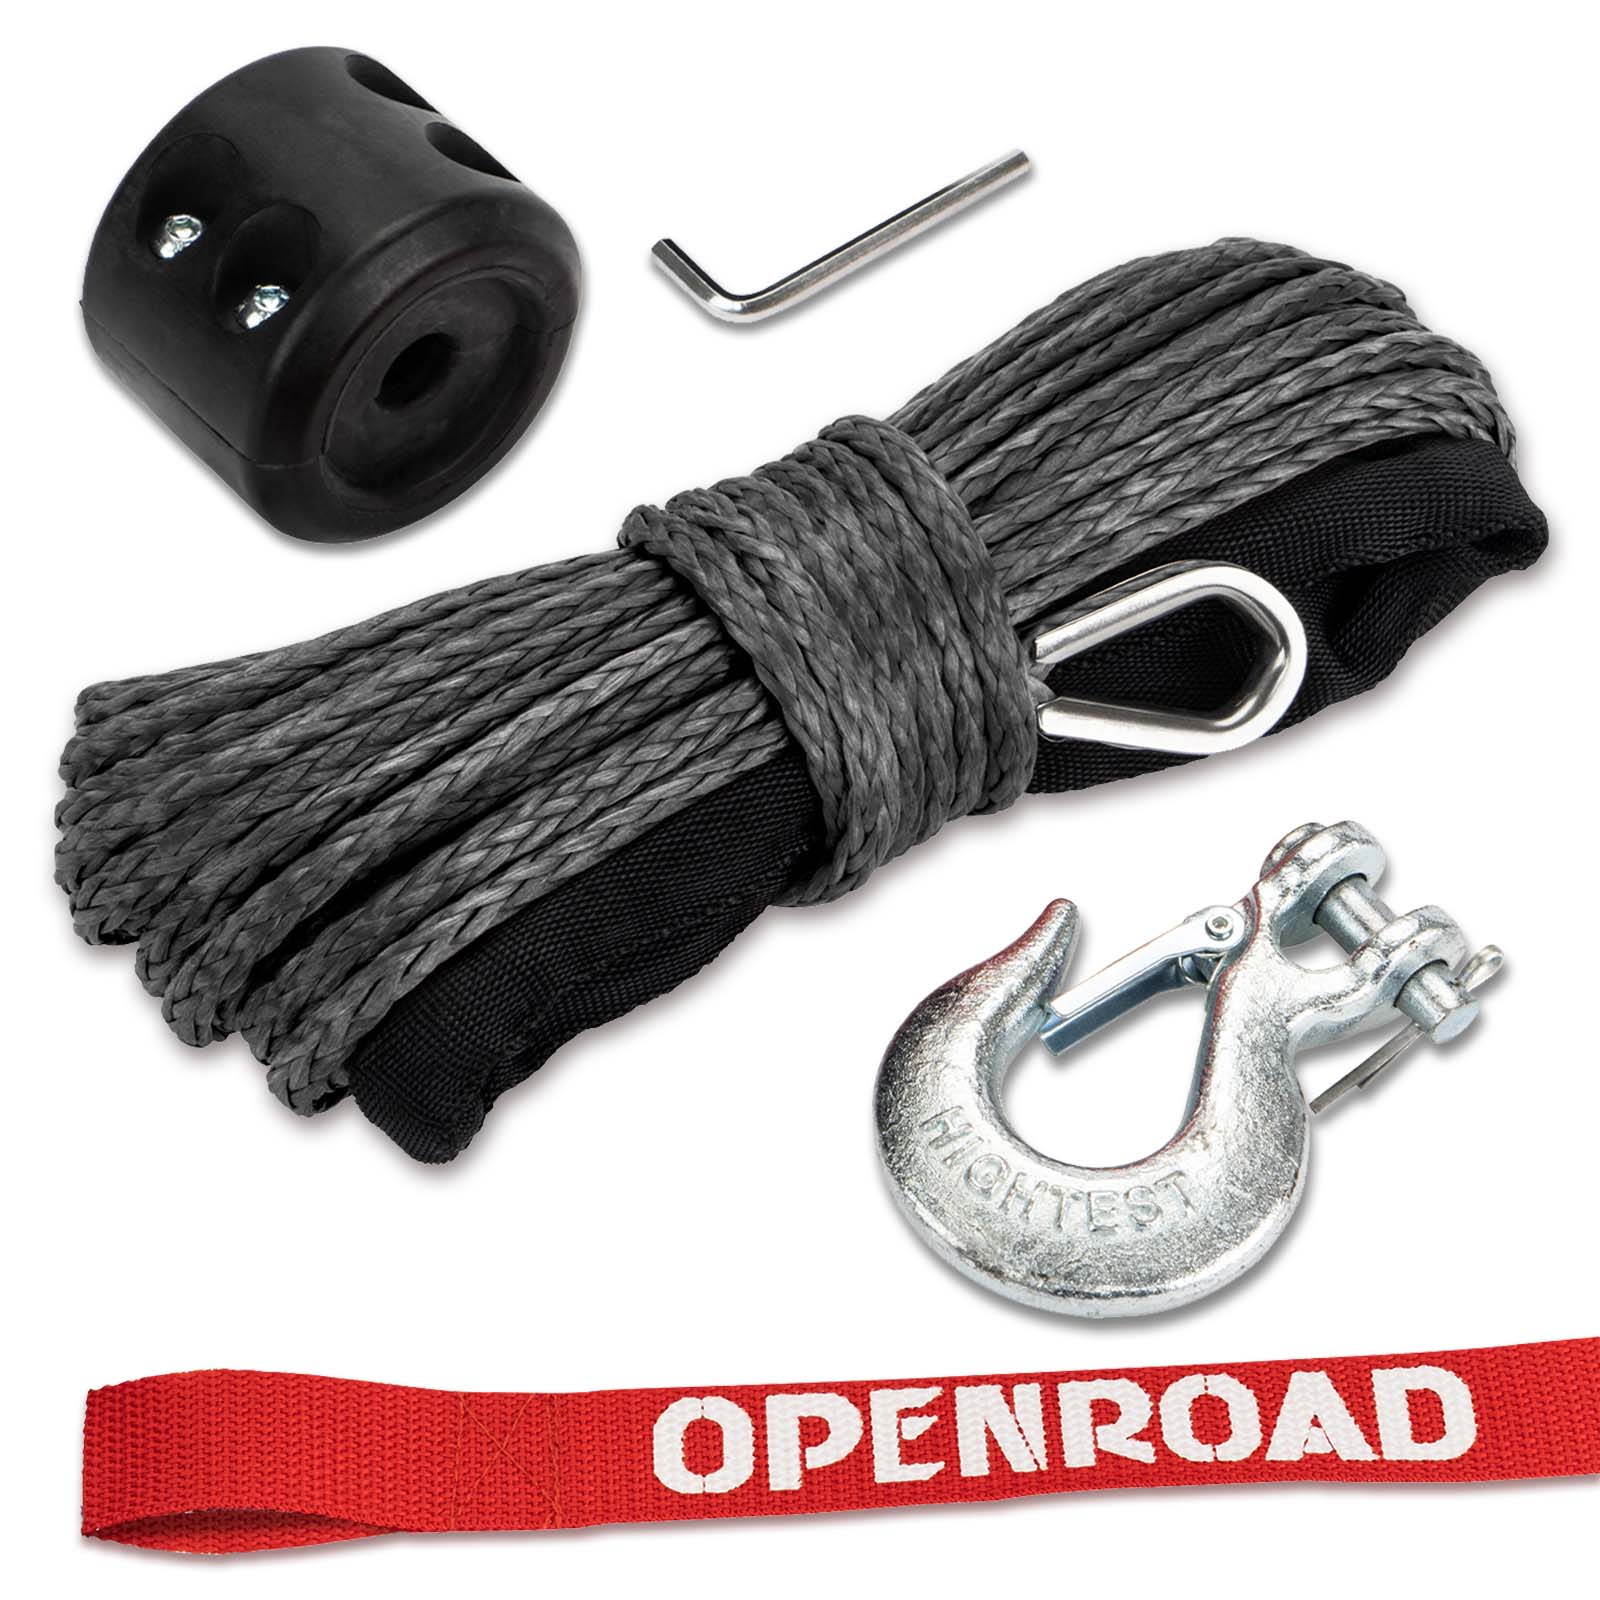 Winch Accessories-OPENROAD – openroad4wd.com